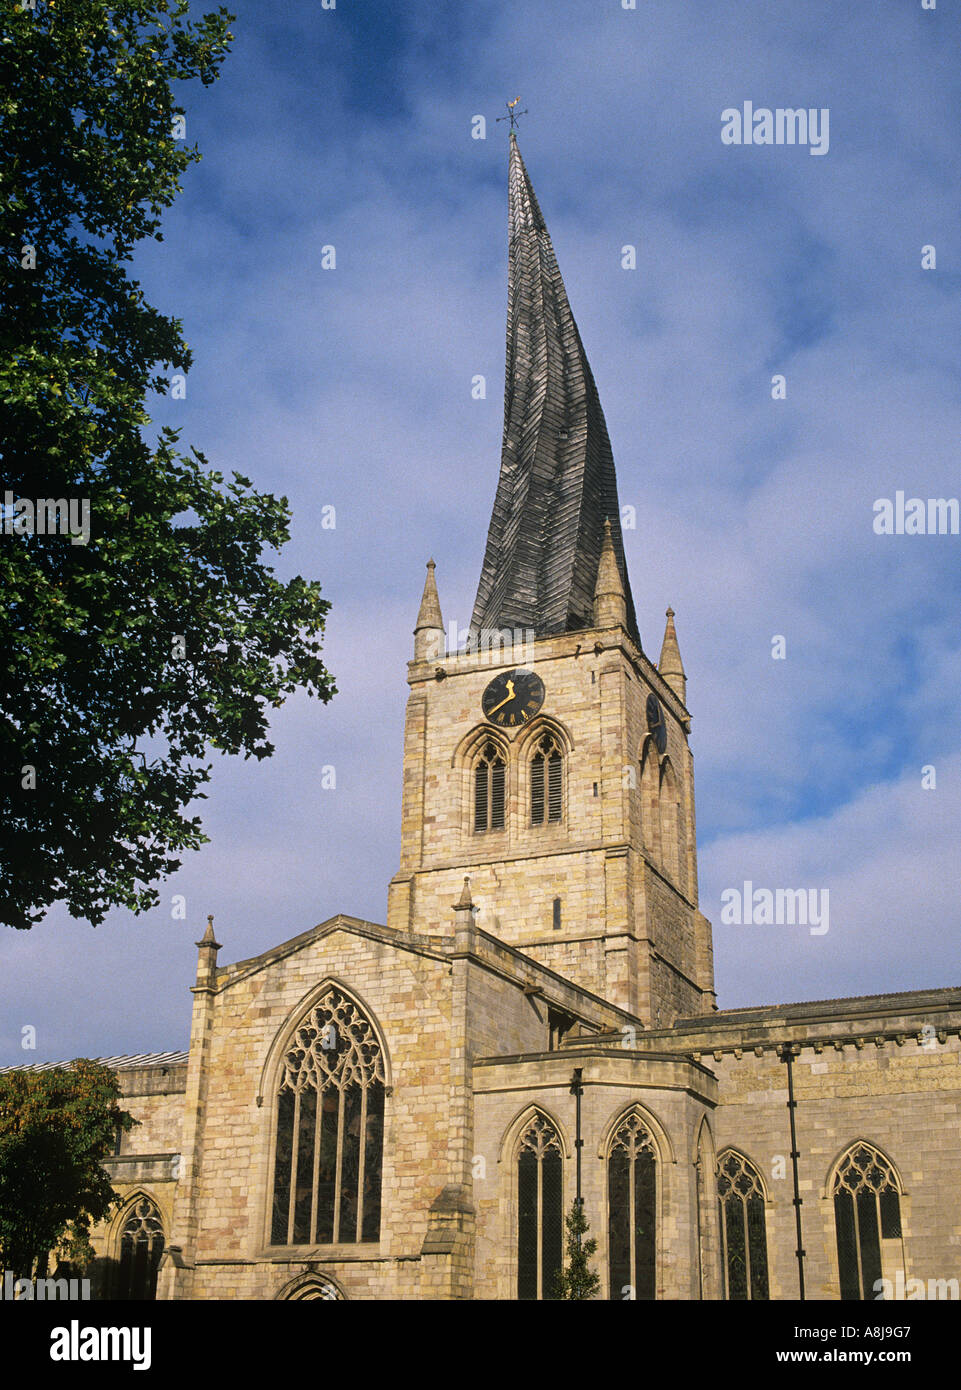 The twisted Spire of the Church of St Mary and All Saints in Chesterfield Stock Photo